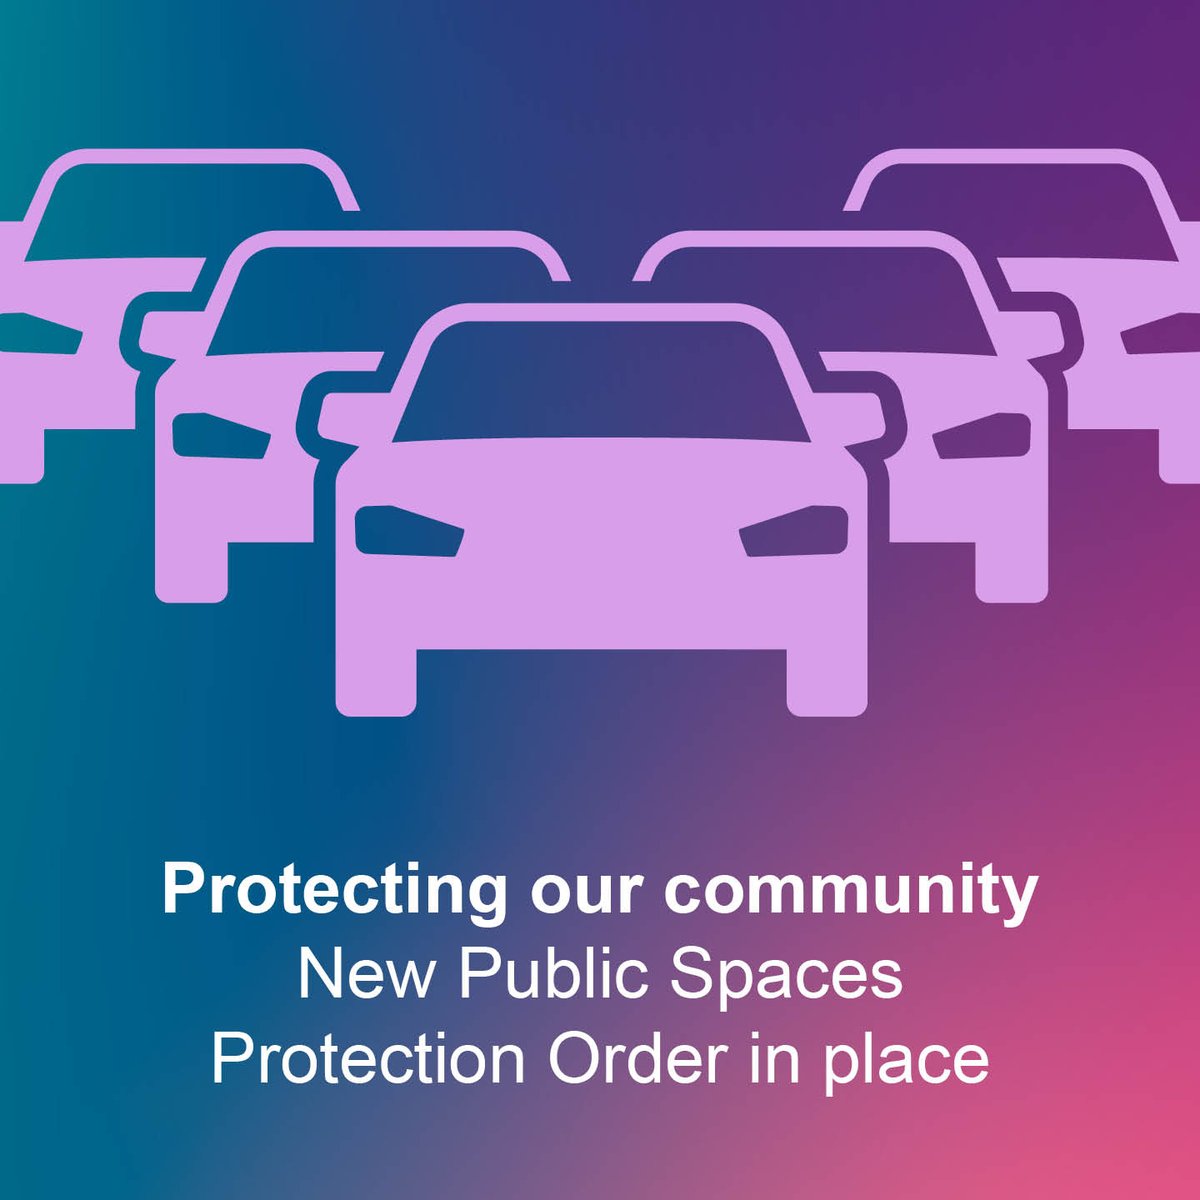 Following a public consultation last year, a Public Spaces Protection Order is now in place to manage vehicle-related anti-social behaviour in our community to ensure our public spaces remain safe and peaceful for everyone: ow.ly/R8KO50R8s7b #ProtectingOurCommunity